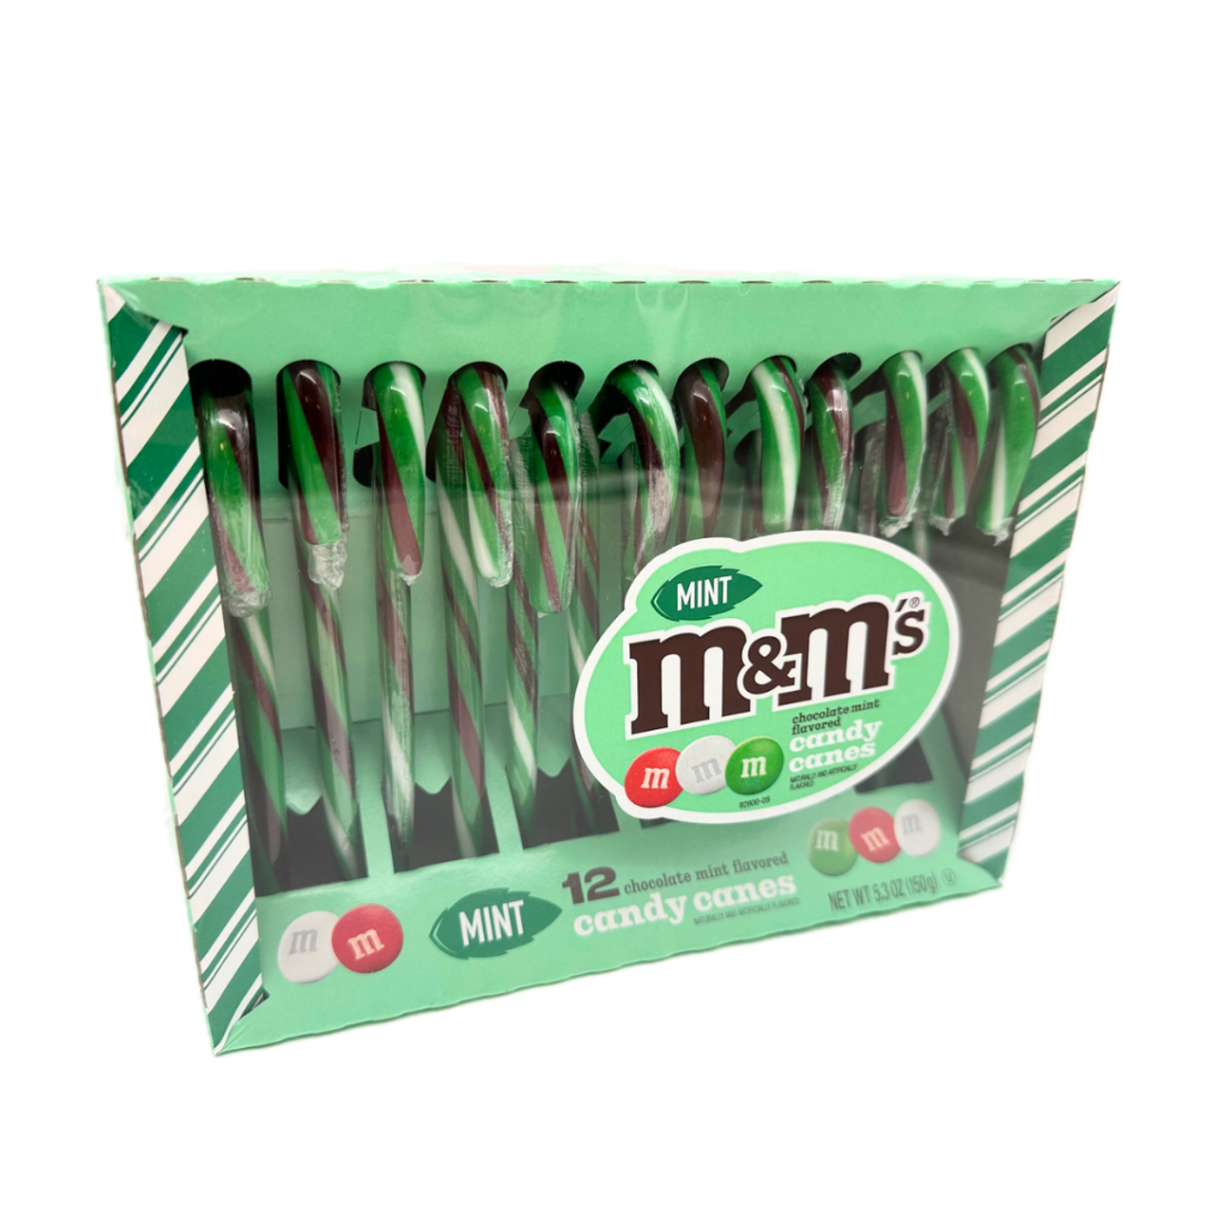 M&M's Chocolate Mint Candy Canes 5.3oz - 12ct